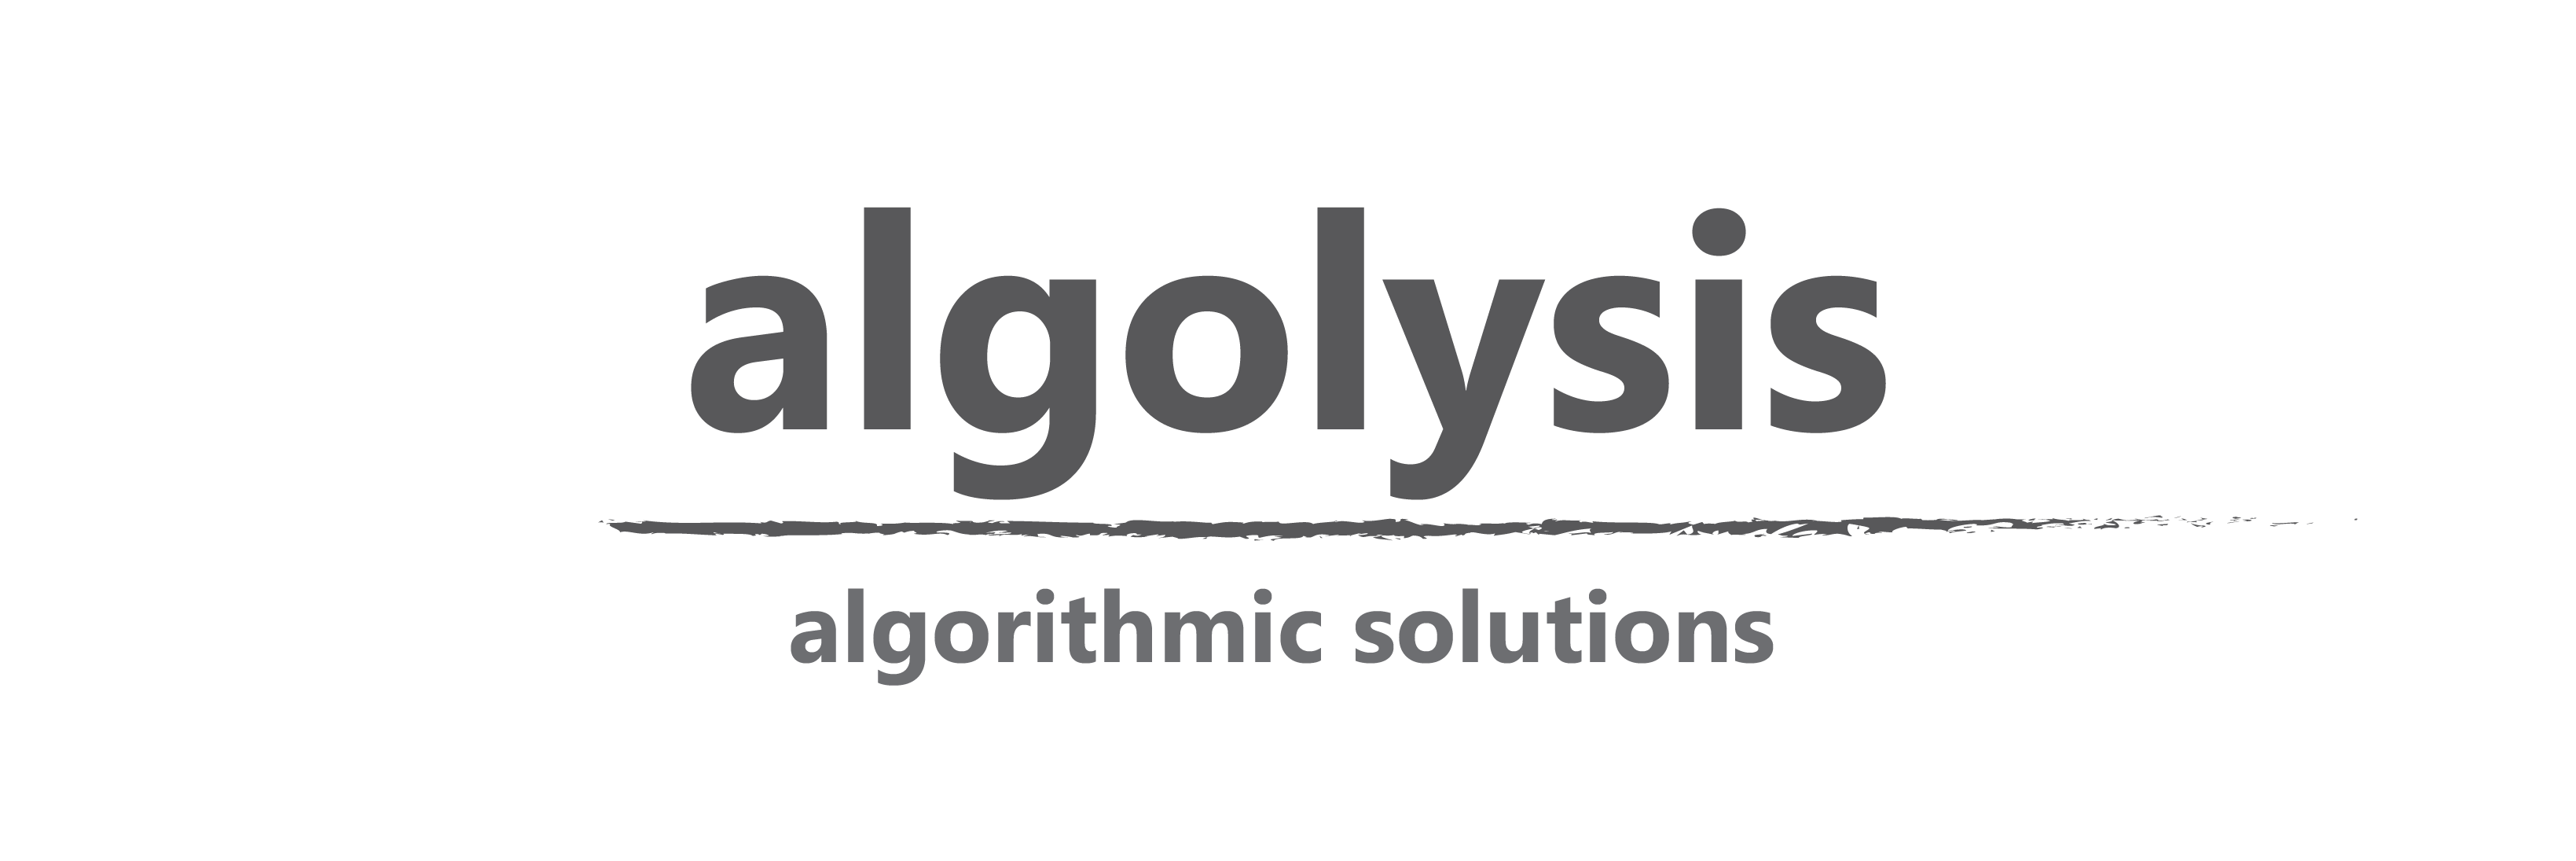 algolysis_corporate-identity_v4.1-Grayscale_LOGO-dark-on-white-text-only